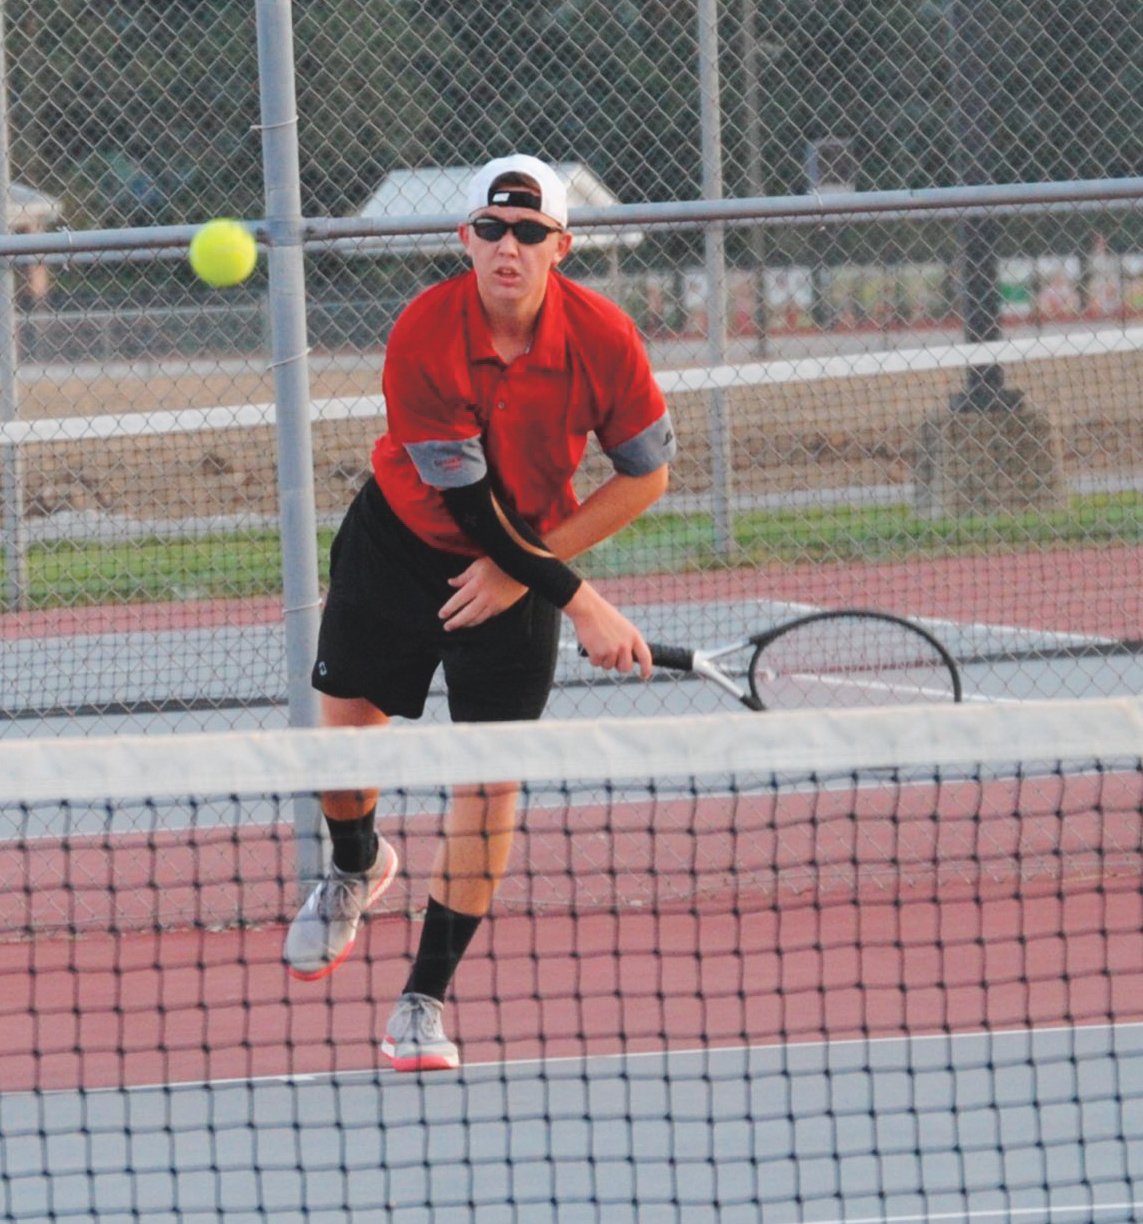 Southmont's Trevor McKinney will continue his tennis career at Wabash College this fall.